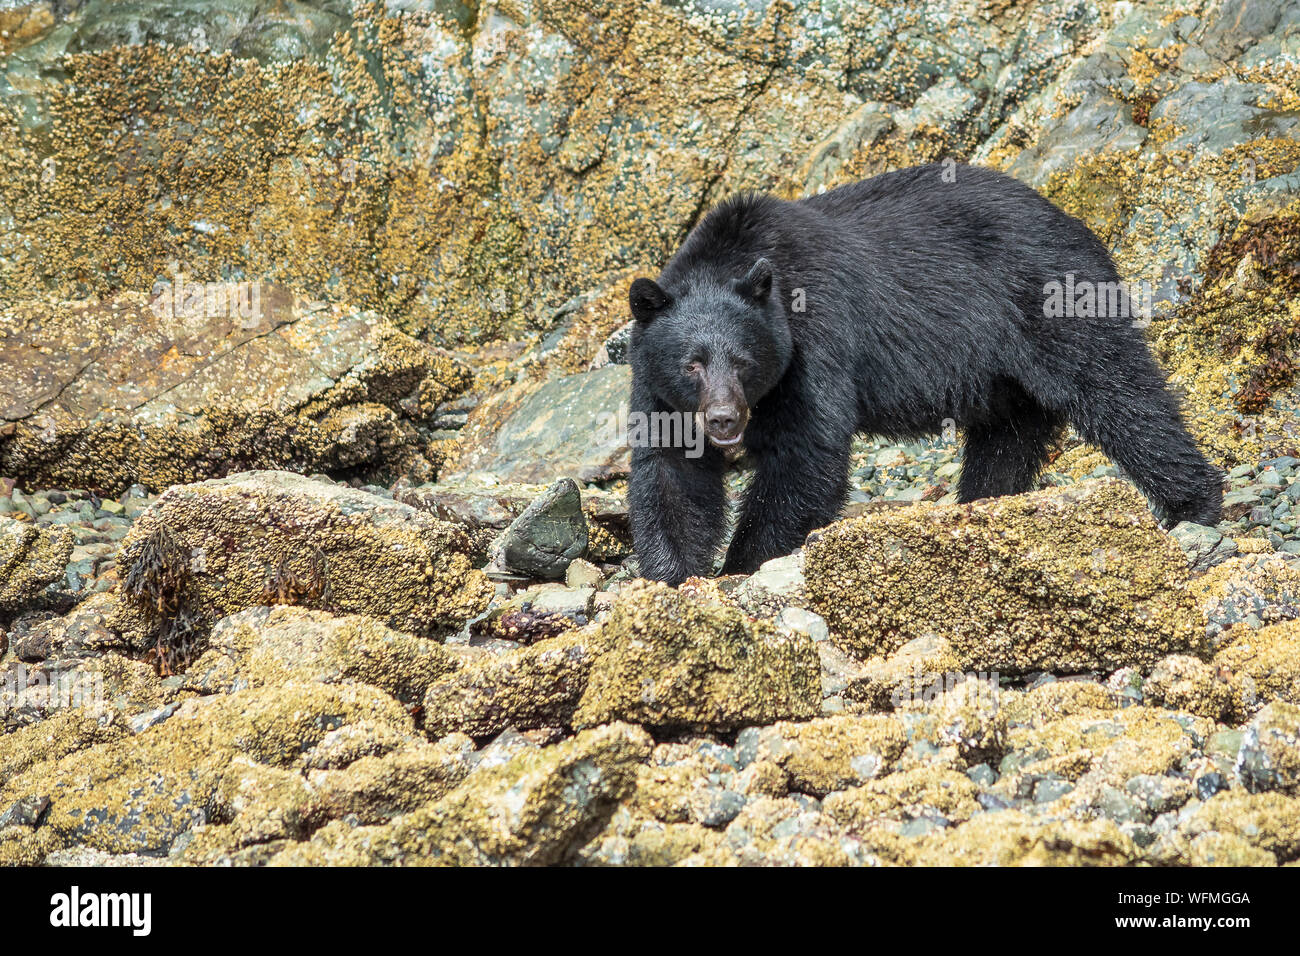 A ursus americanus vancouveri, or Vancouver Island black bear, forages a beach for food near the town of Tofino on the west coast of the island. Stock Photo